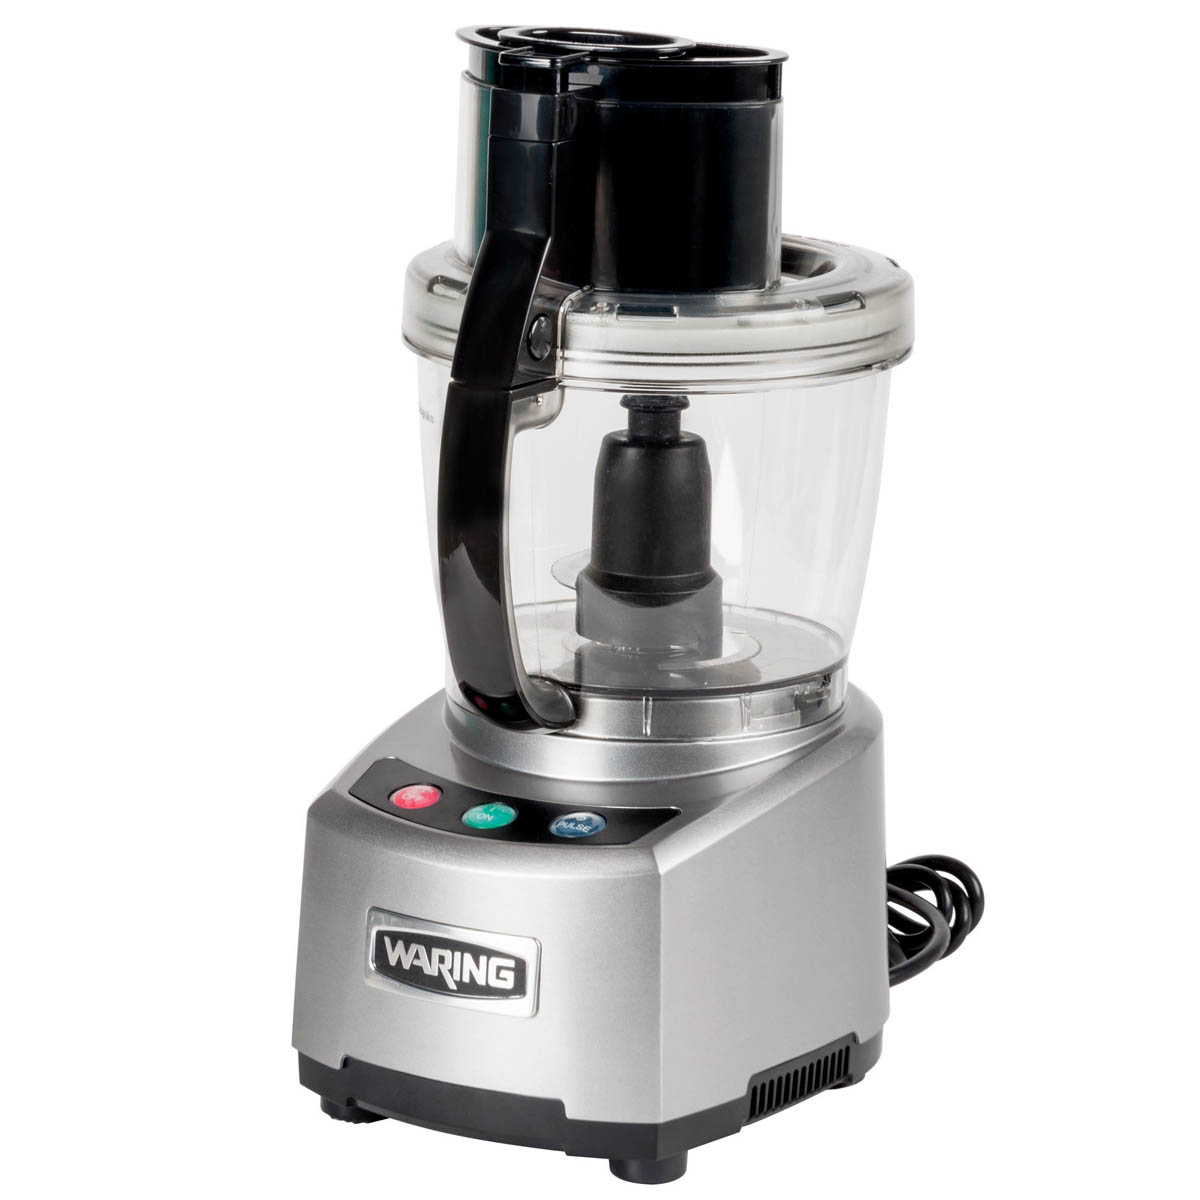 Waring WFP16S Bowl Style Vegetable Cutter/Food Processor